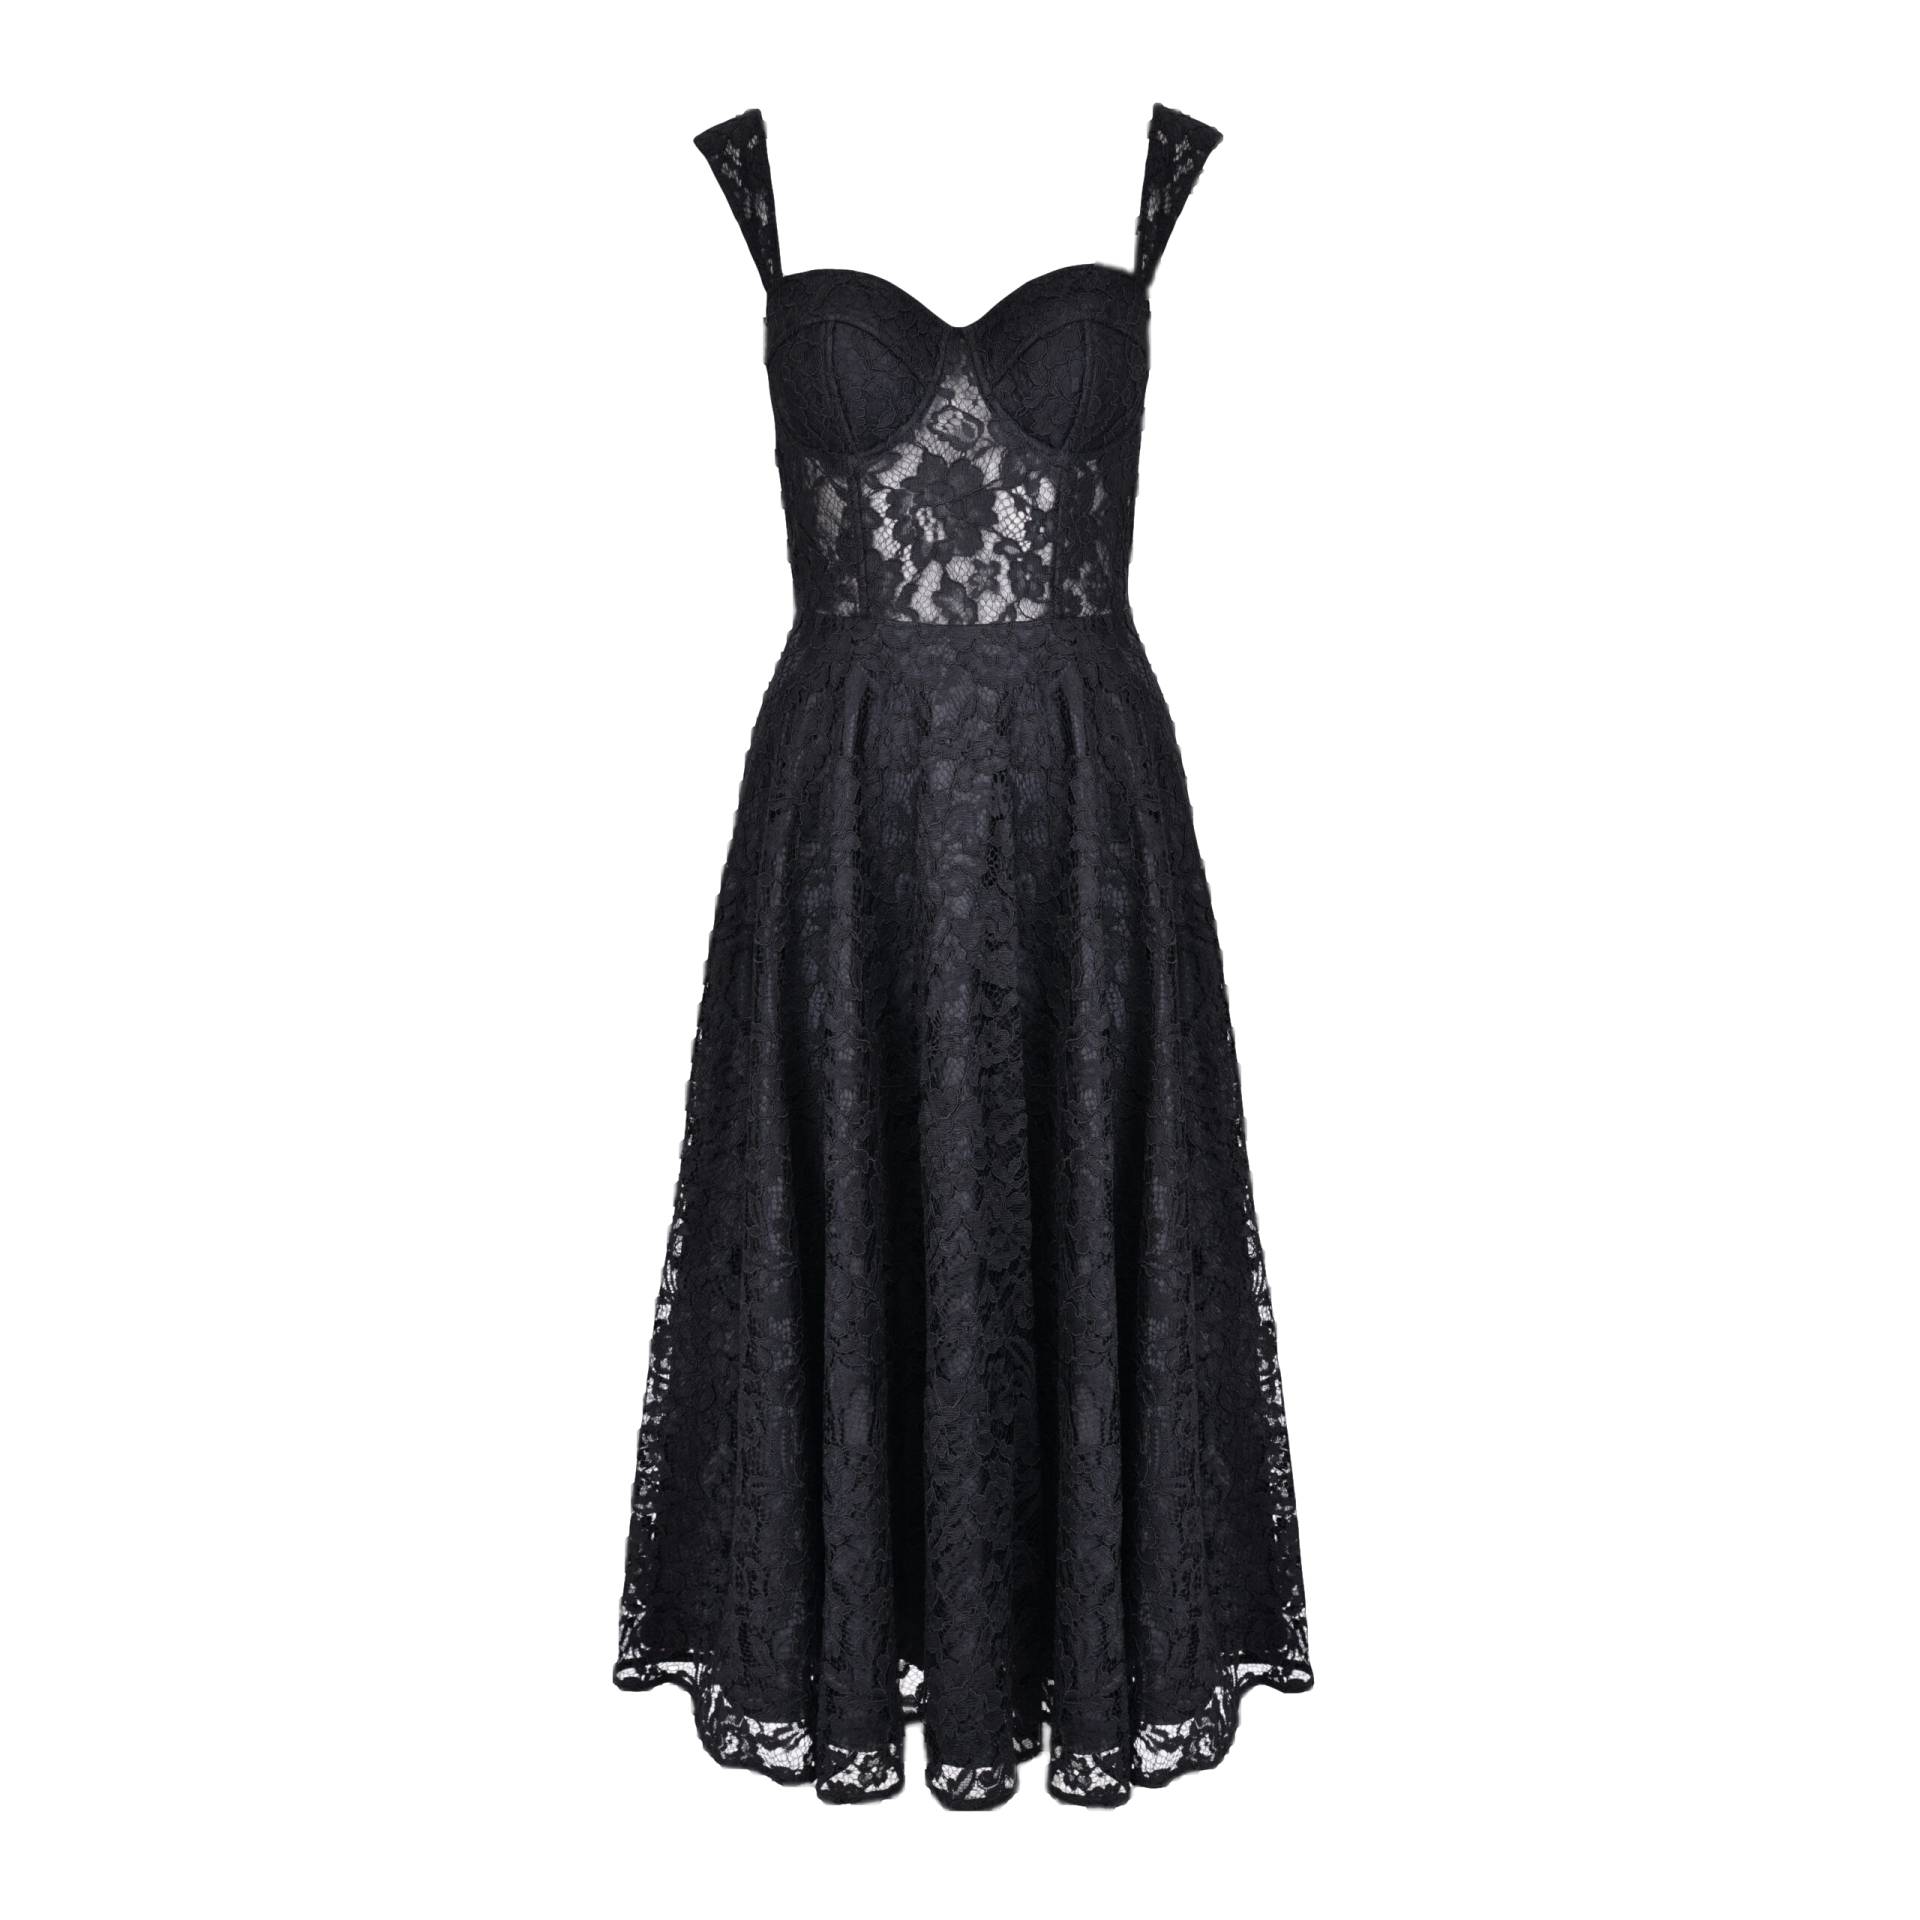 Extremely feminine dress made of black lace von Lily Was Here